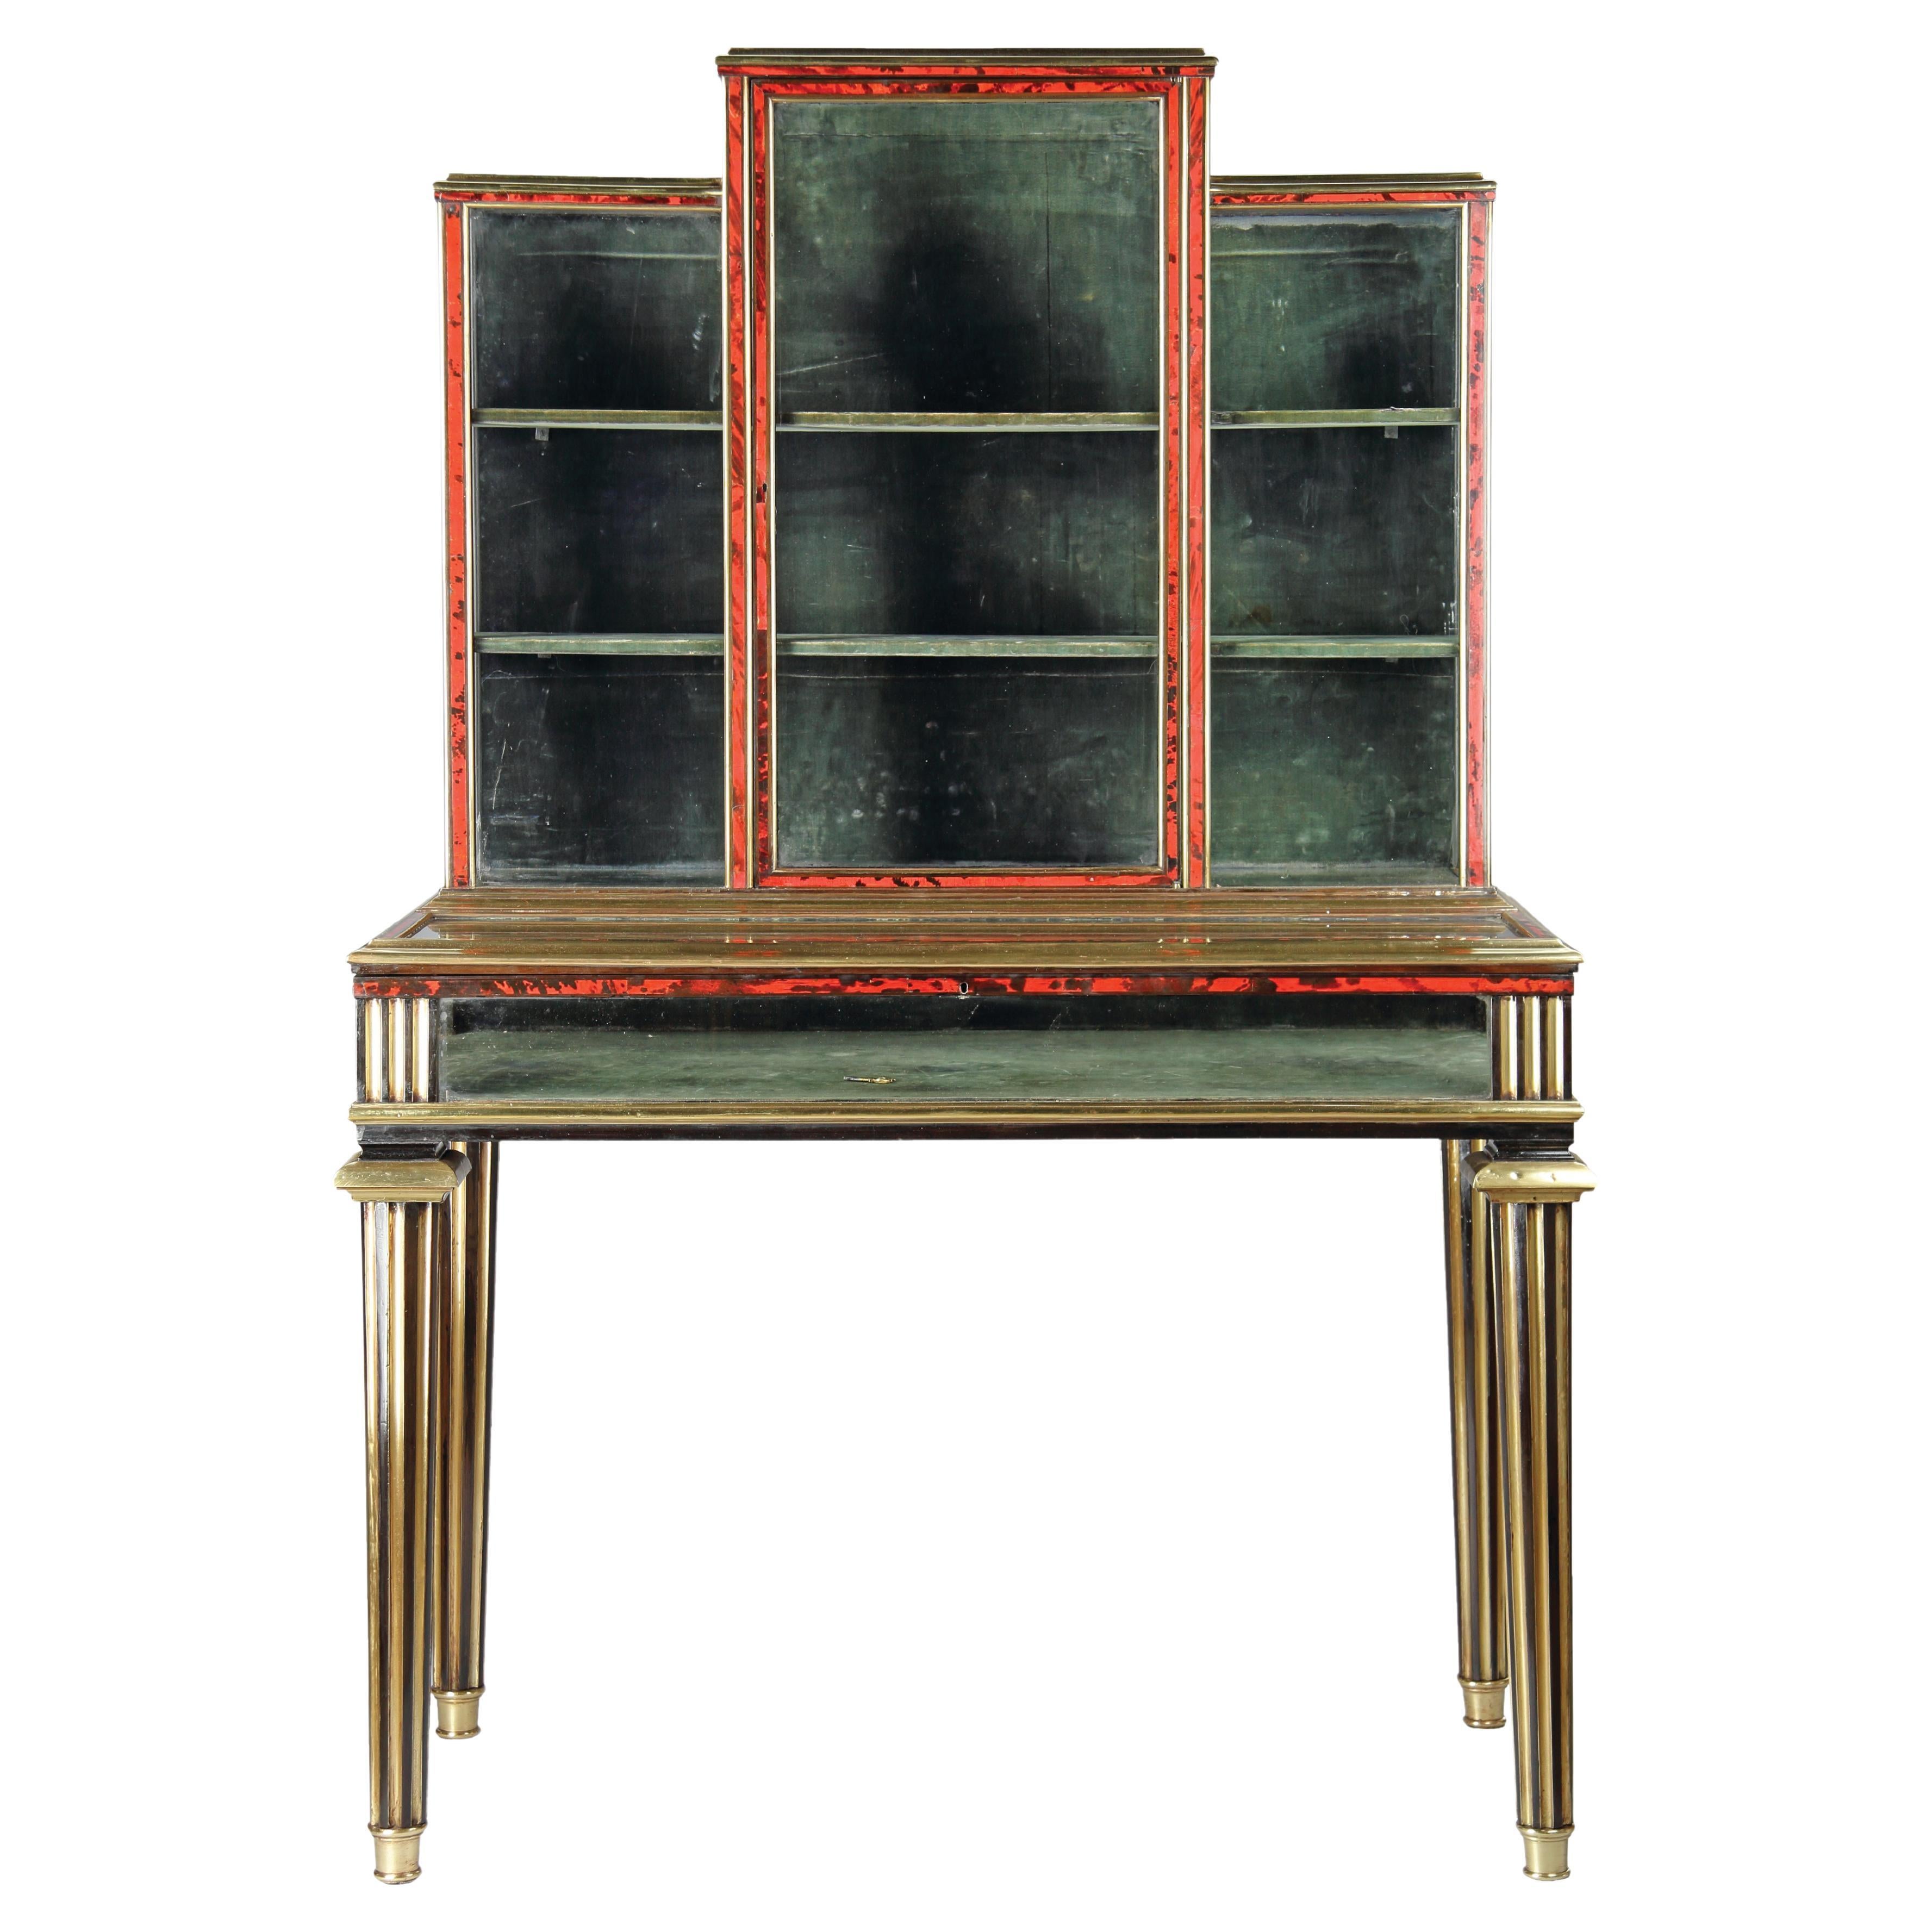 A Superb Pair of French Brass Mounted Tortoiseshell Veneered Collectors Cabinets For Sale